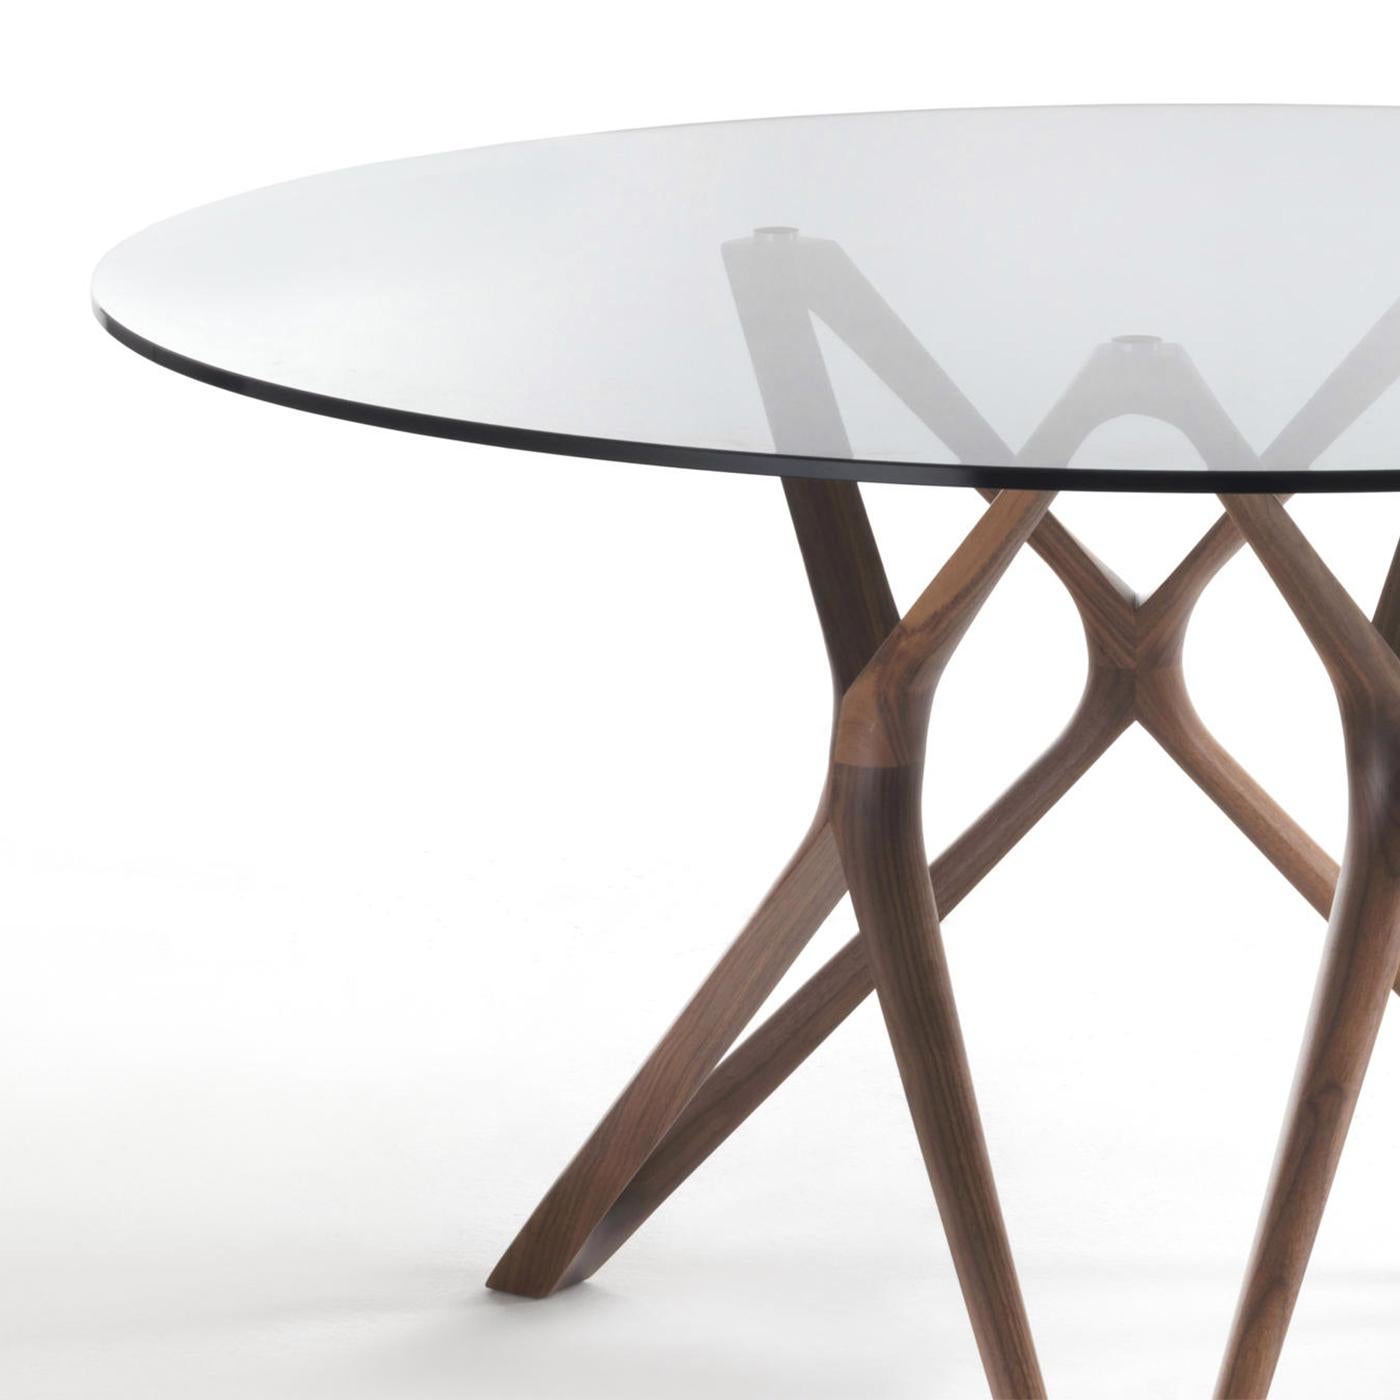 Table Giulia round with base in solid walnut wood,
handcrafted wood. With tempered clear glass top
(12mm thickness).
Available on request in:
Diameter 130cm x height 75cm, price: 7600,00€.
Diameter 140cm x height 75cm, price: 7900,00€.
Diameter